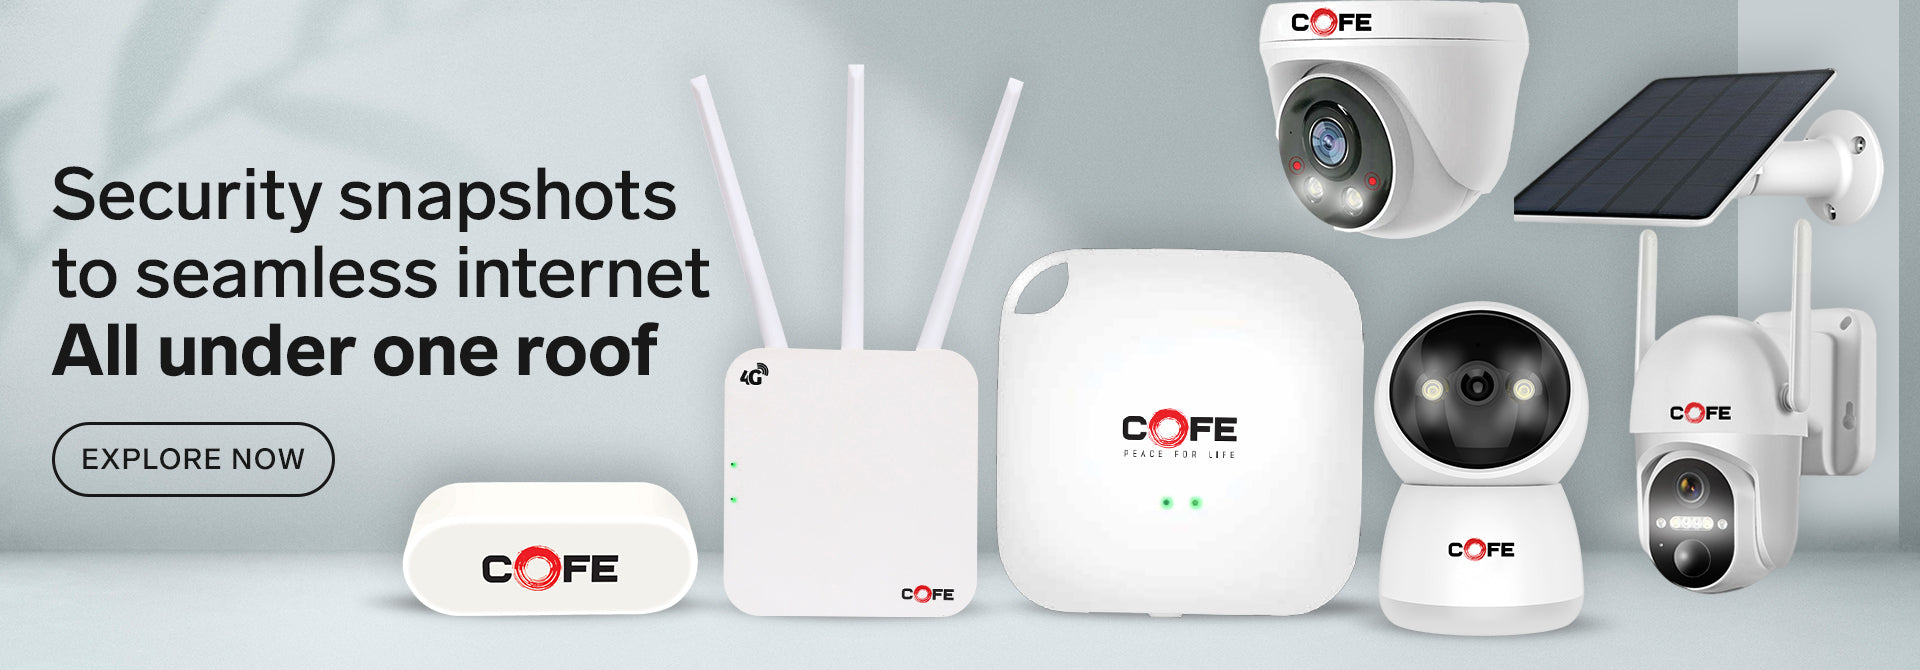 COFE CF-4G707WF SIM Based 5G WIFI Support All SIM Supports All DVR, CCTVs,  Speed Amn 450 Mbps 4G Router